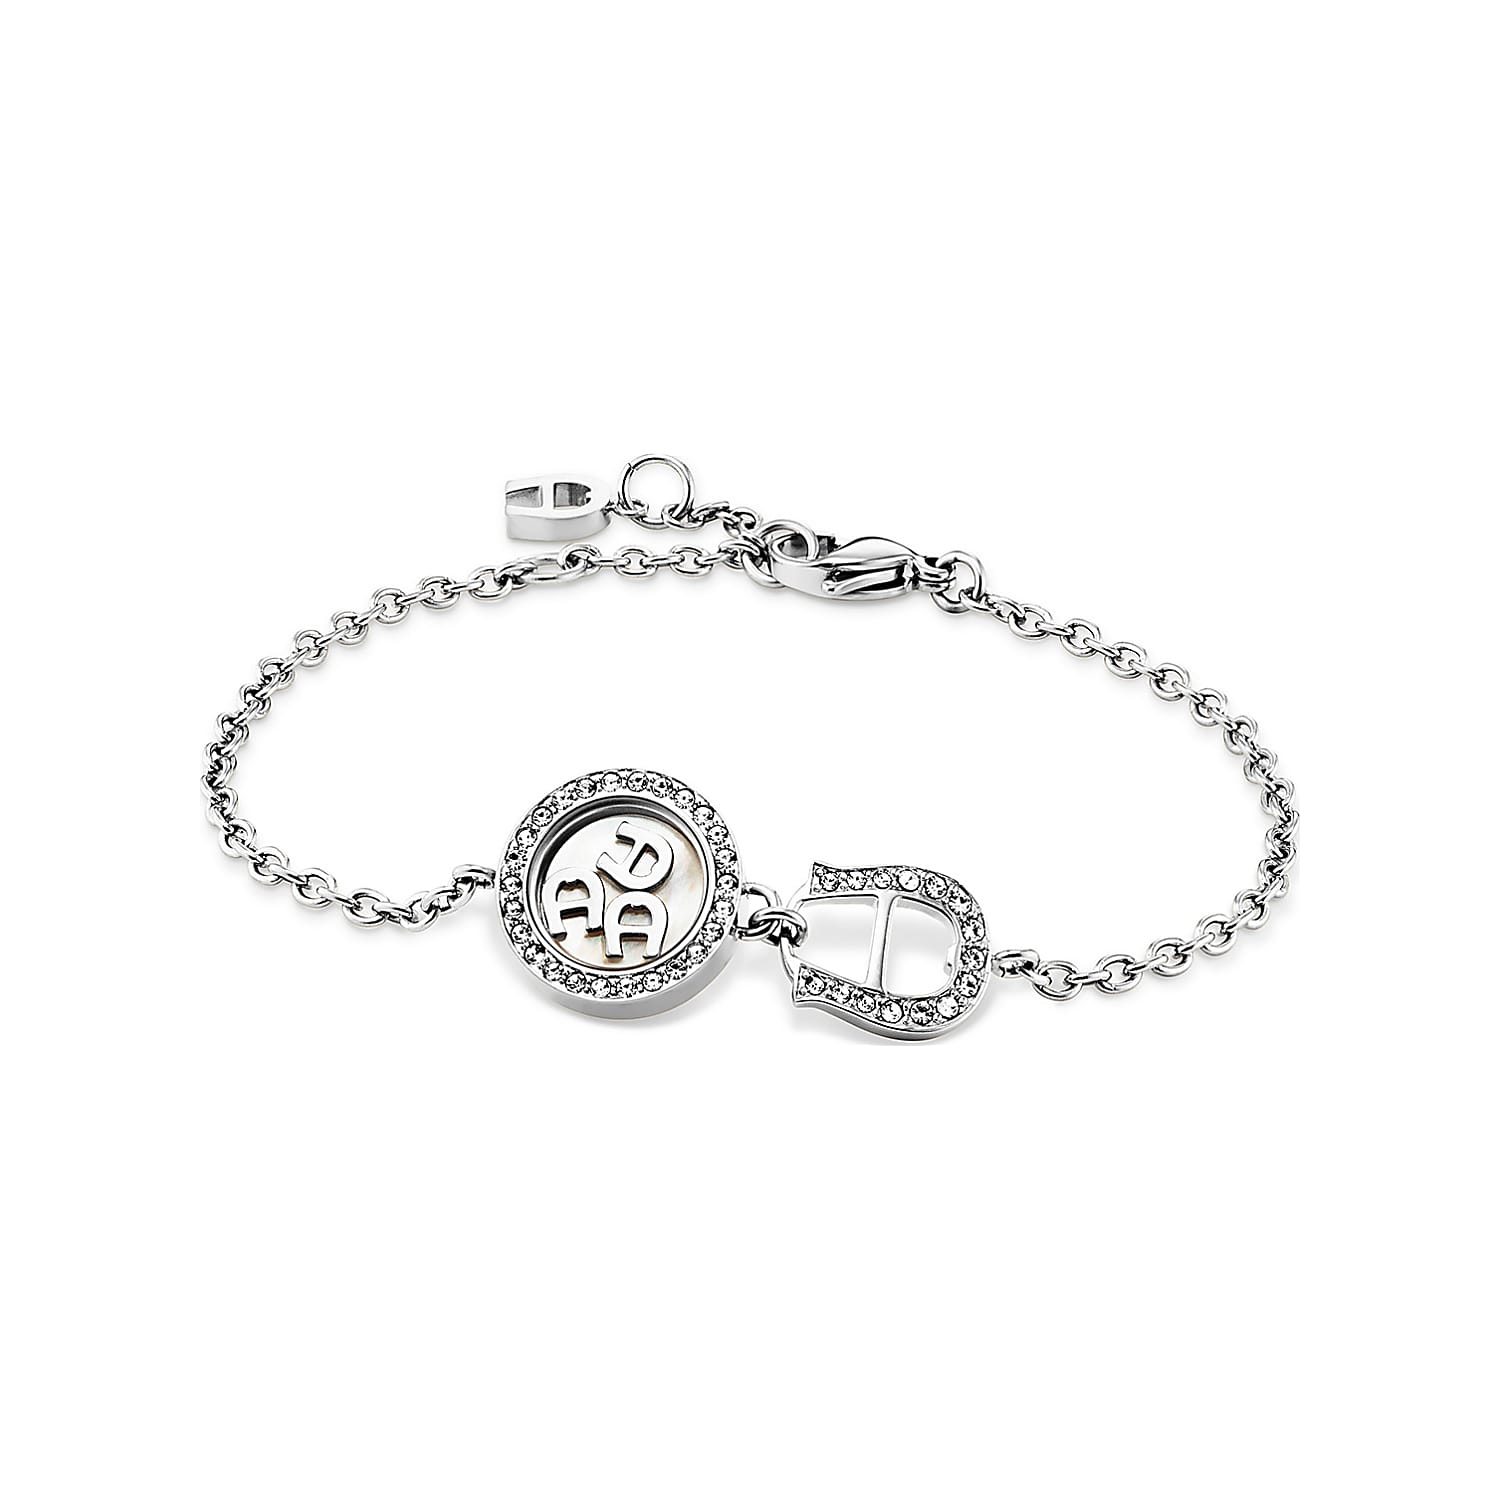 Bracelet with A logo and stones